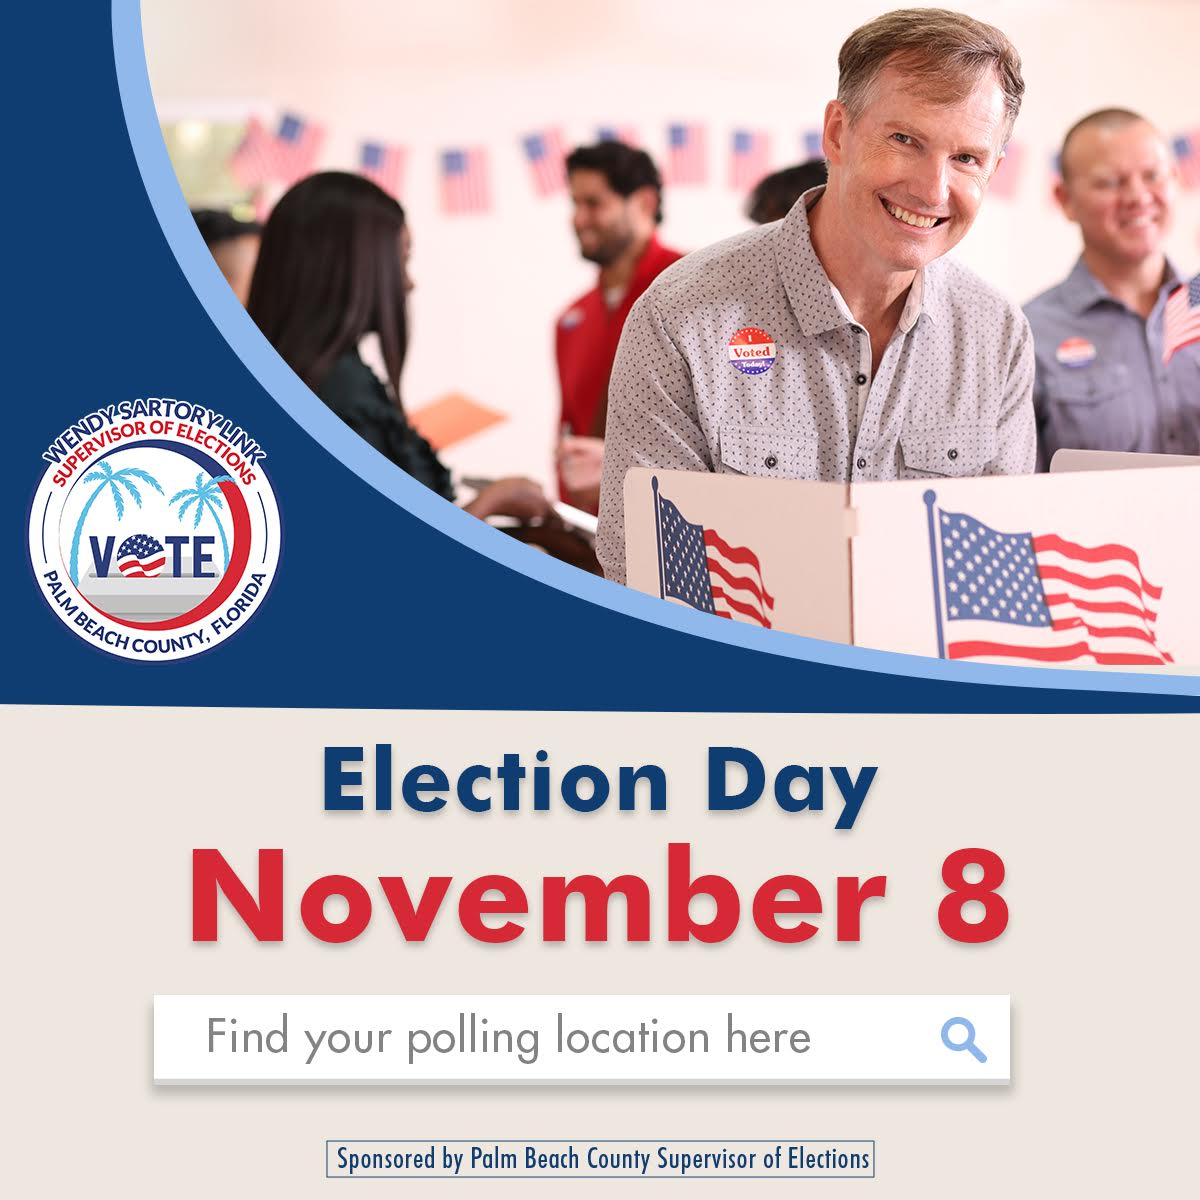 Election Day is Tuesday, November 8th, and many polling locations have recently changed due to redistricting.  Find your polling location by reviewing your voter ID card or online at: https://votepalmbeach.gov/Voters/Precinct-Finder 